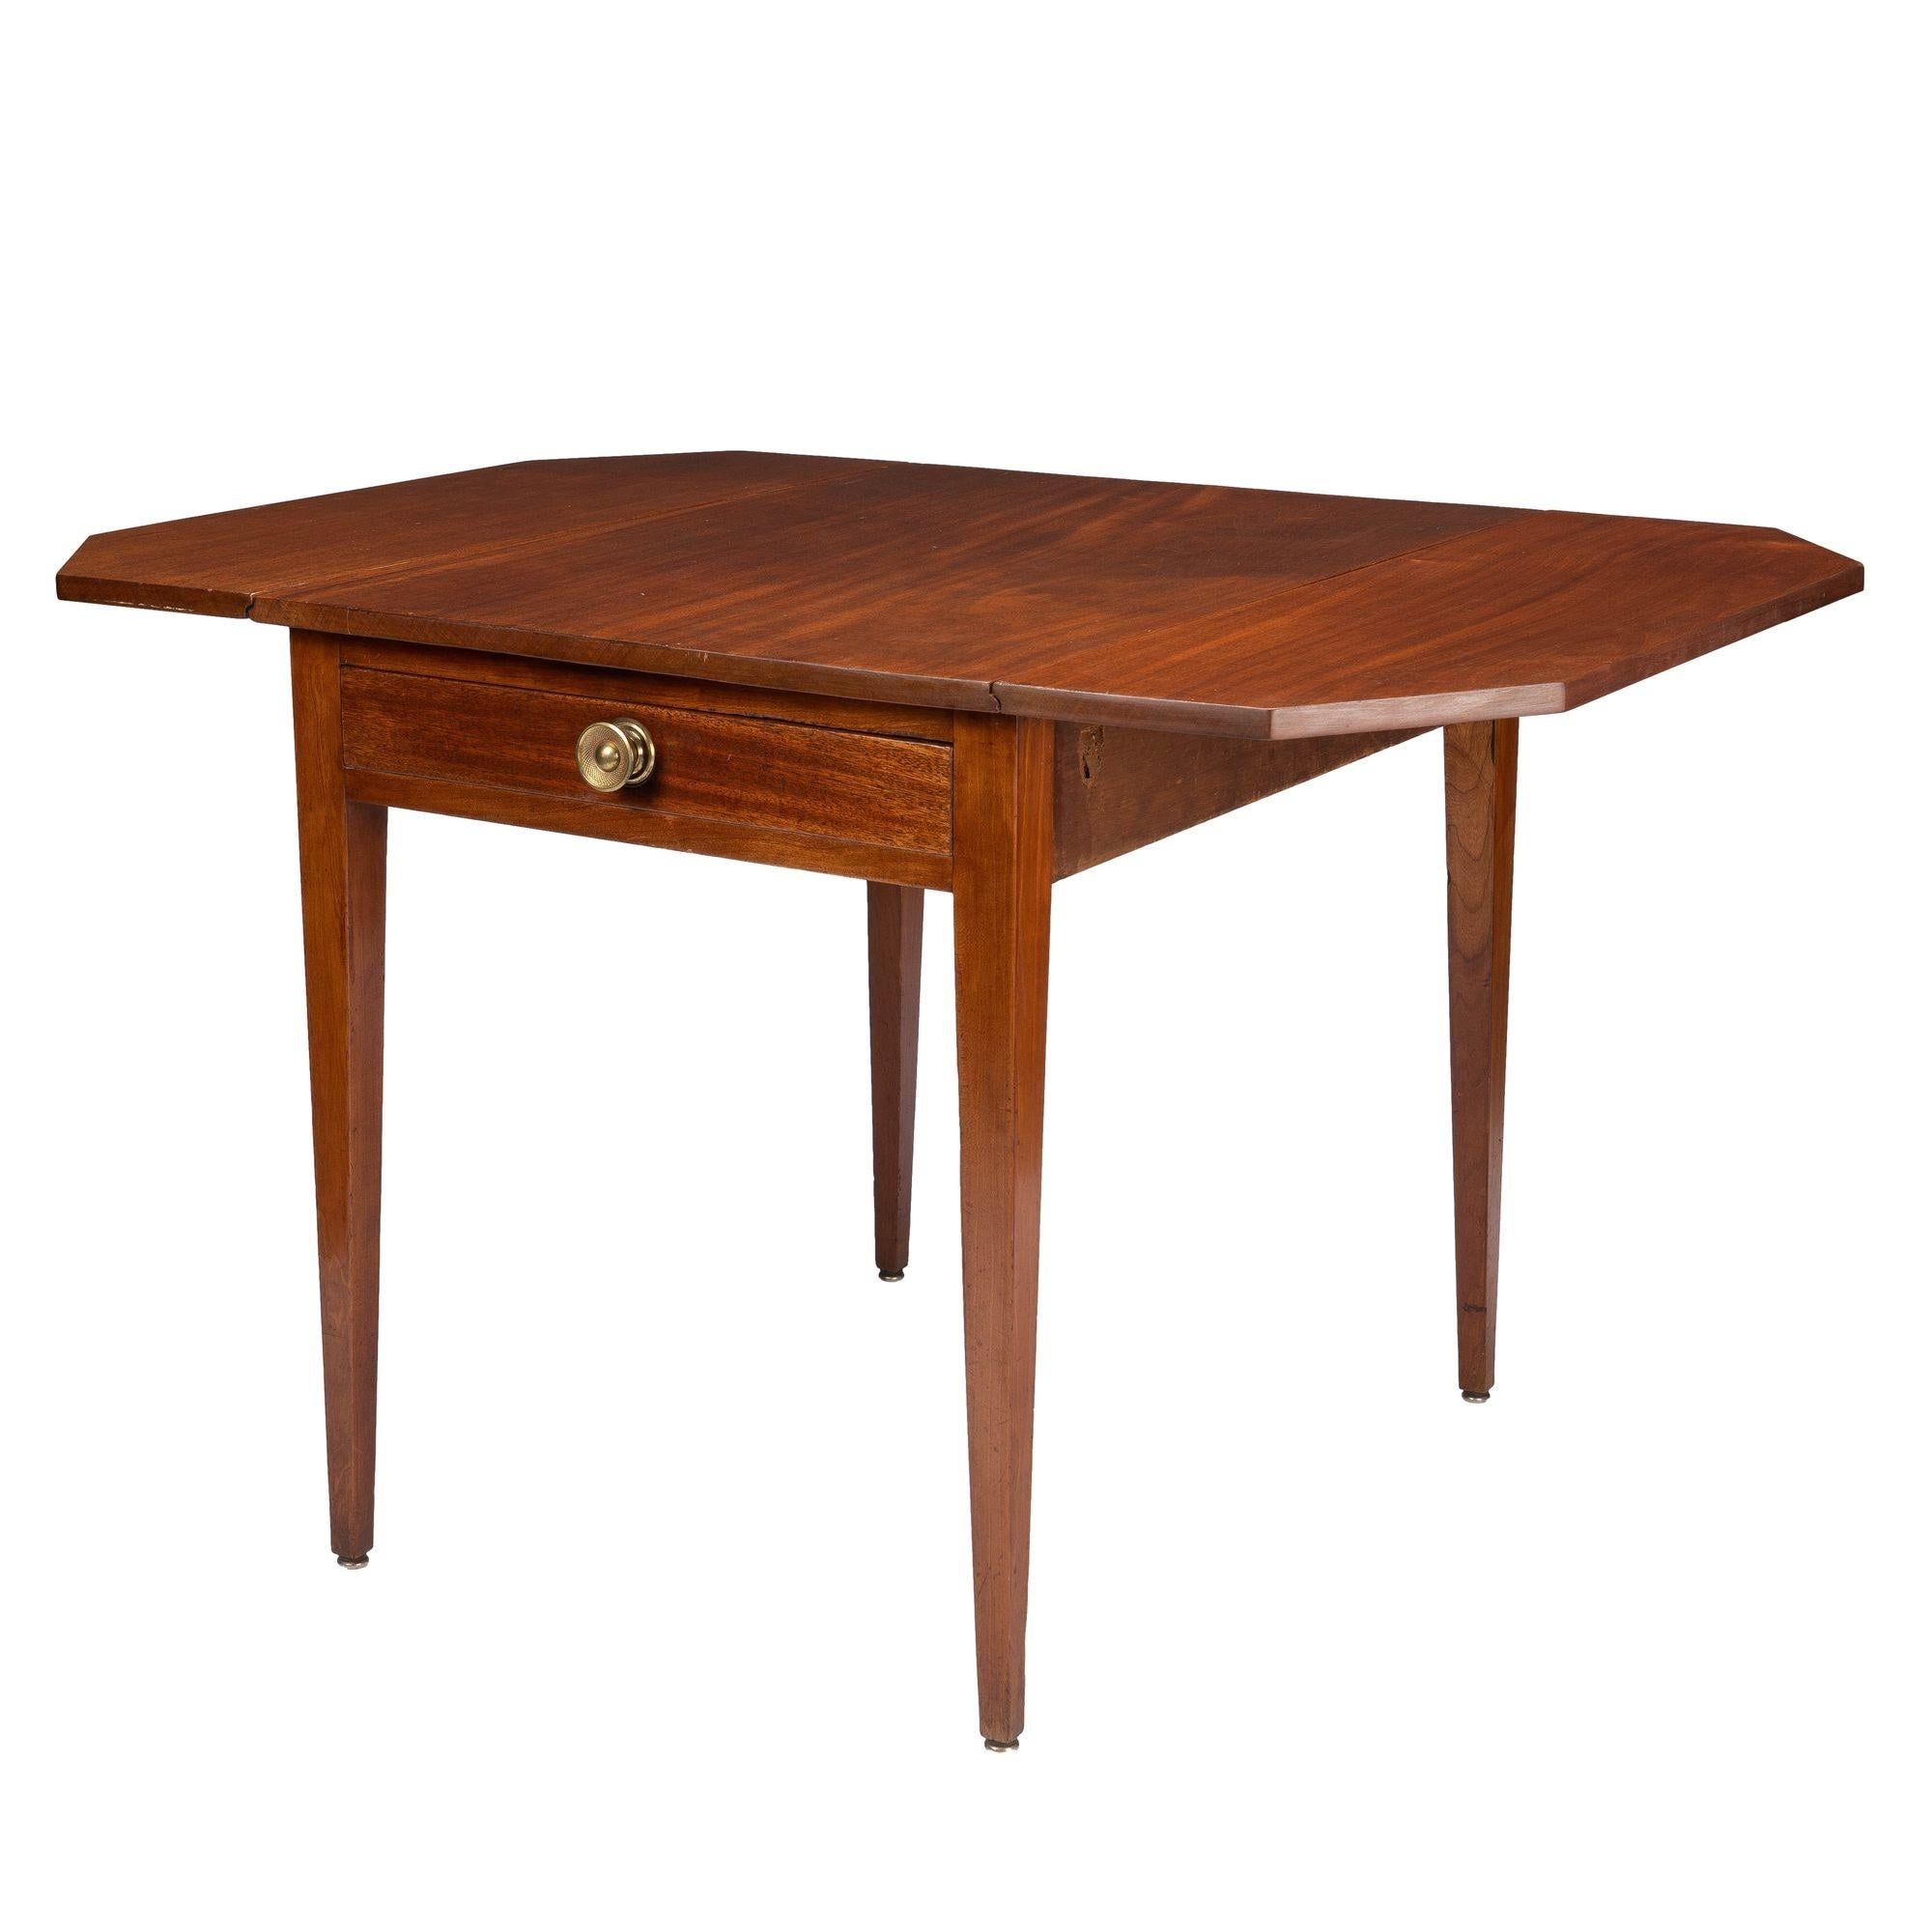 American Hepplewhite drop leaf Pembroke table in Honduran mahogany with a wide rectangular single board top on a conforming apron with four square tapered legs. The apron is fitted with a single drawer with brass drawer pull in the original boring.